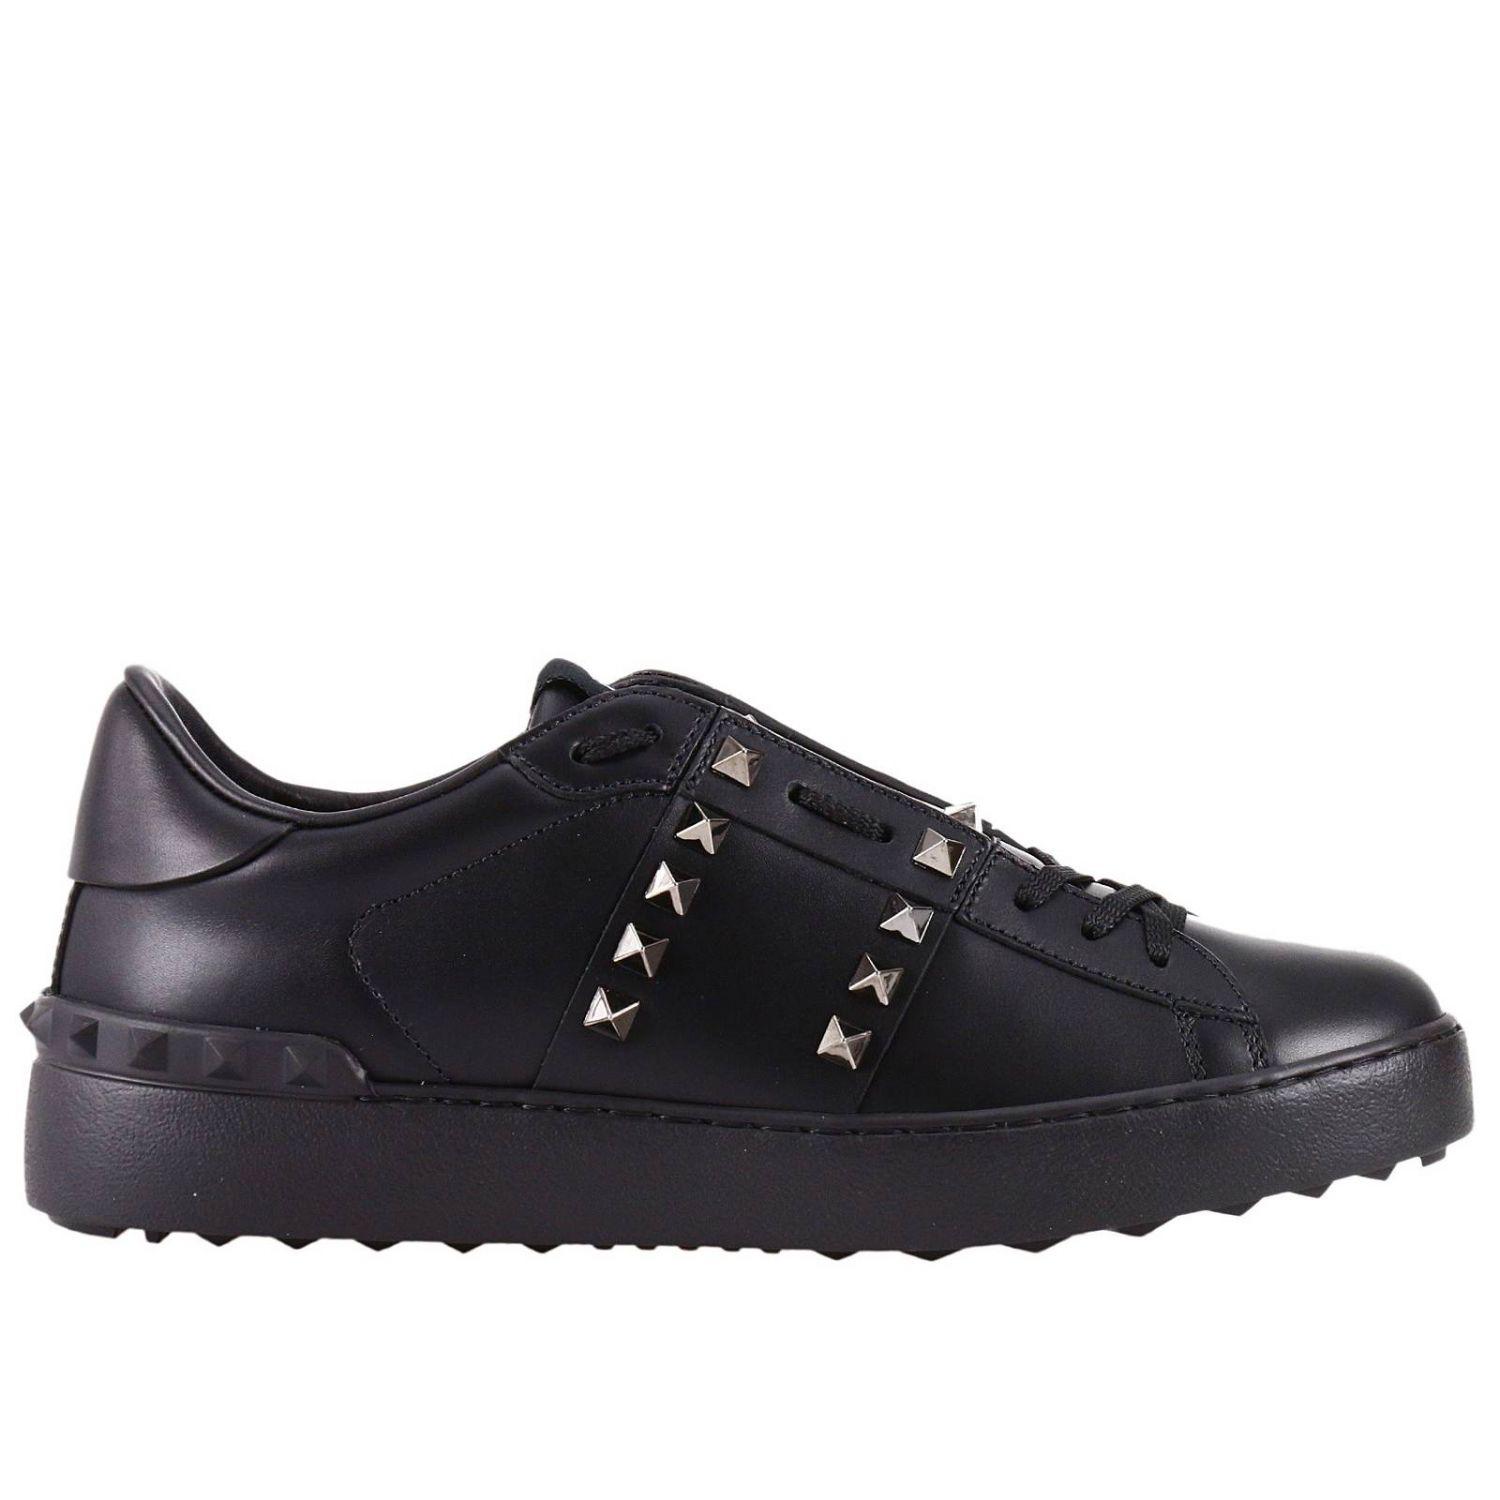 Lyst - Valentino Shoes Women in Black